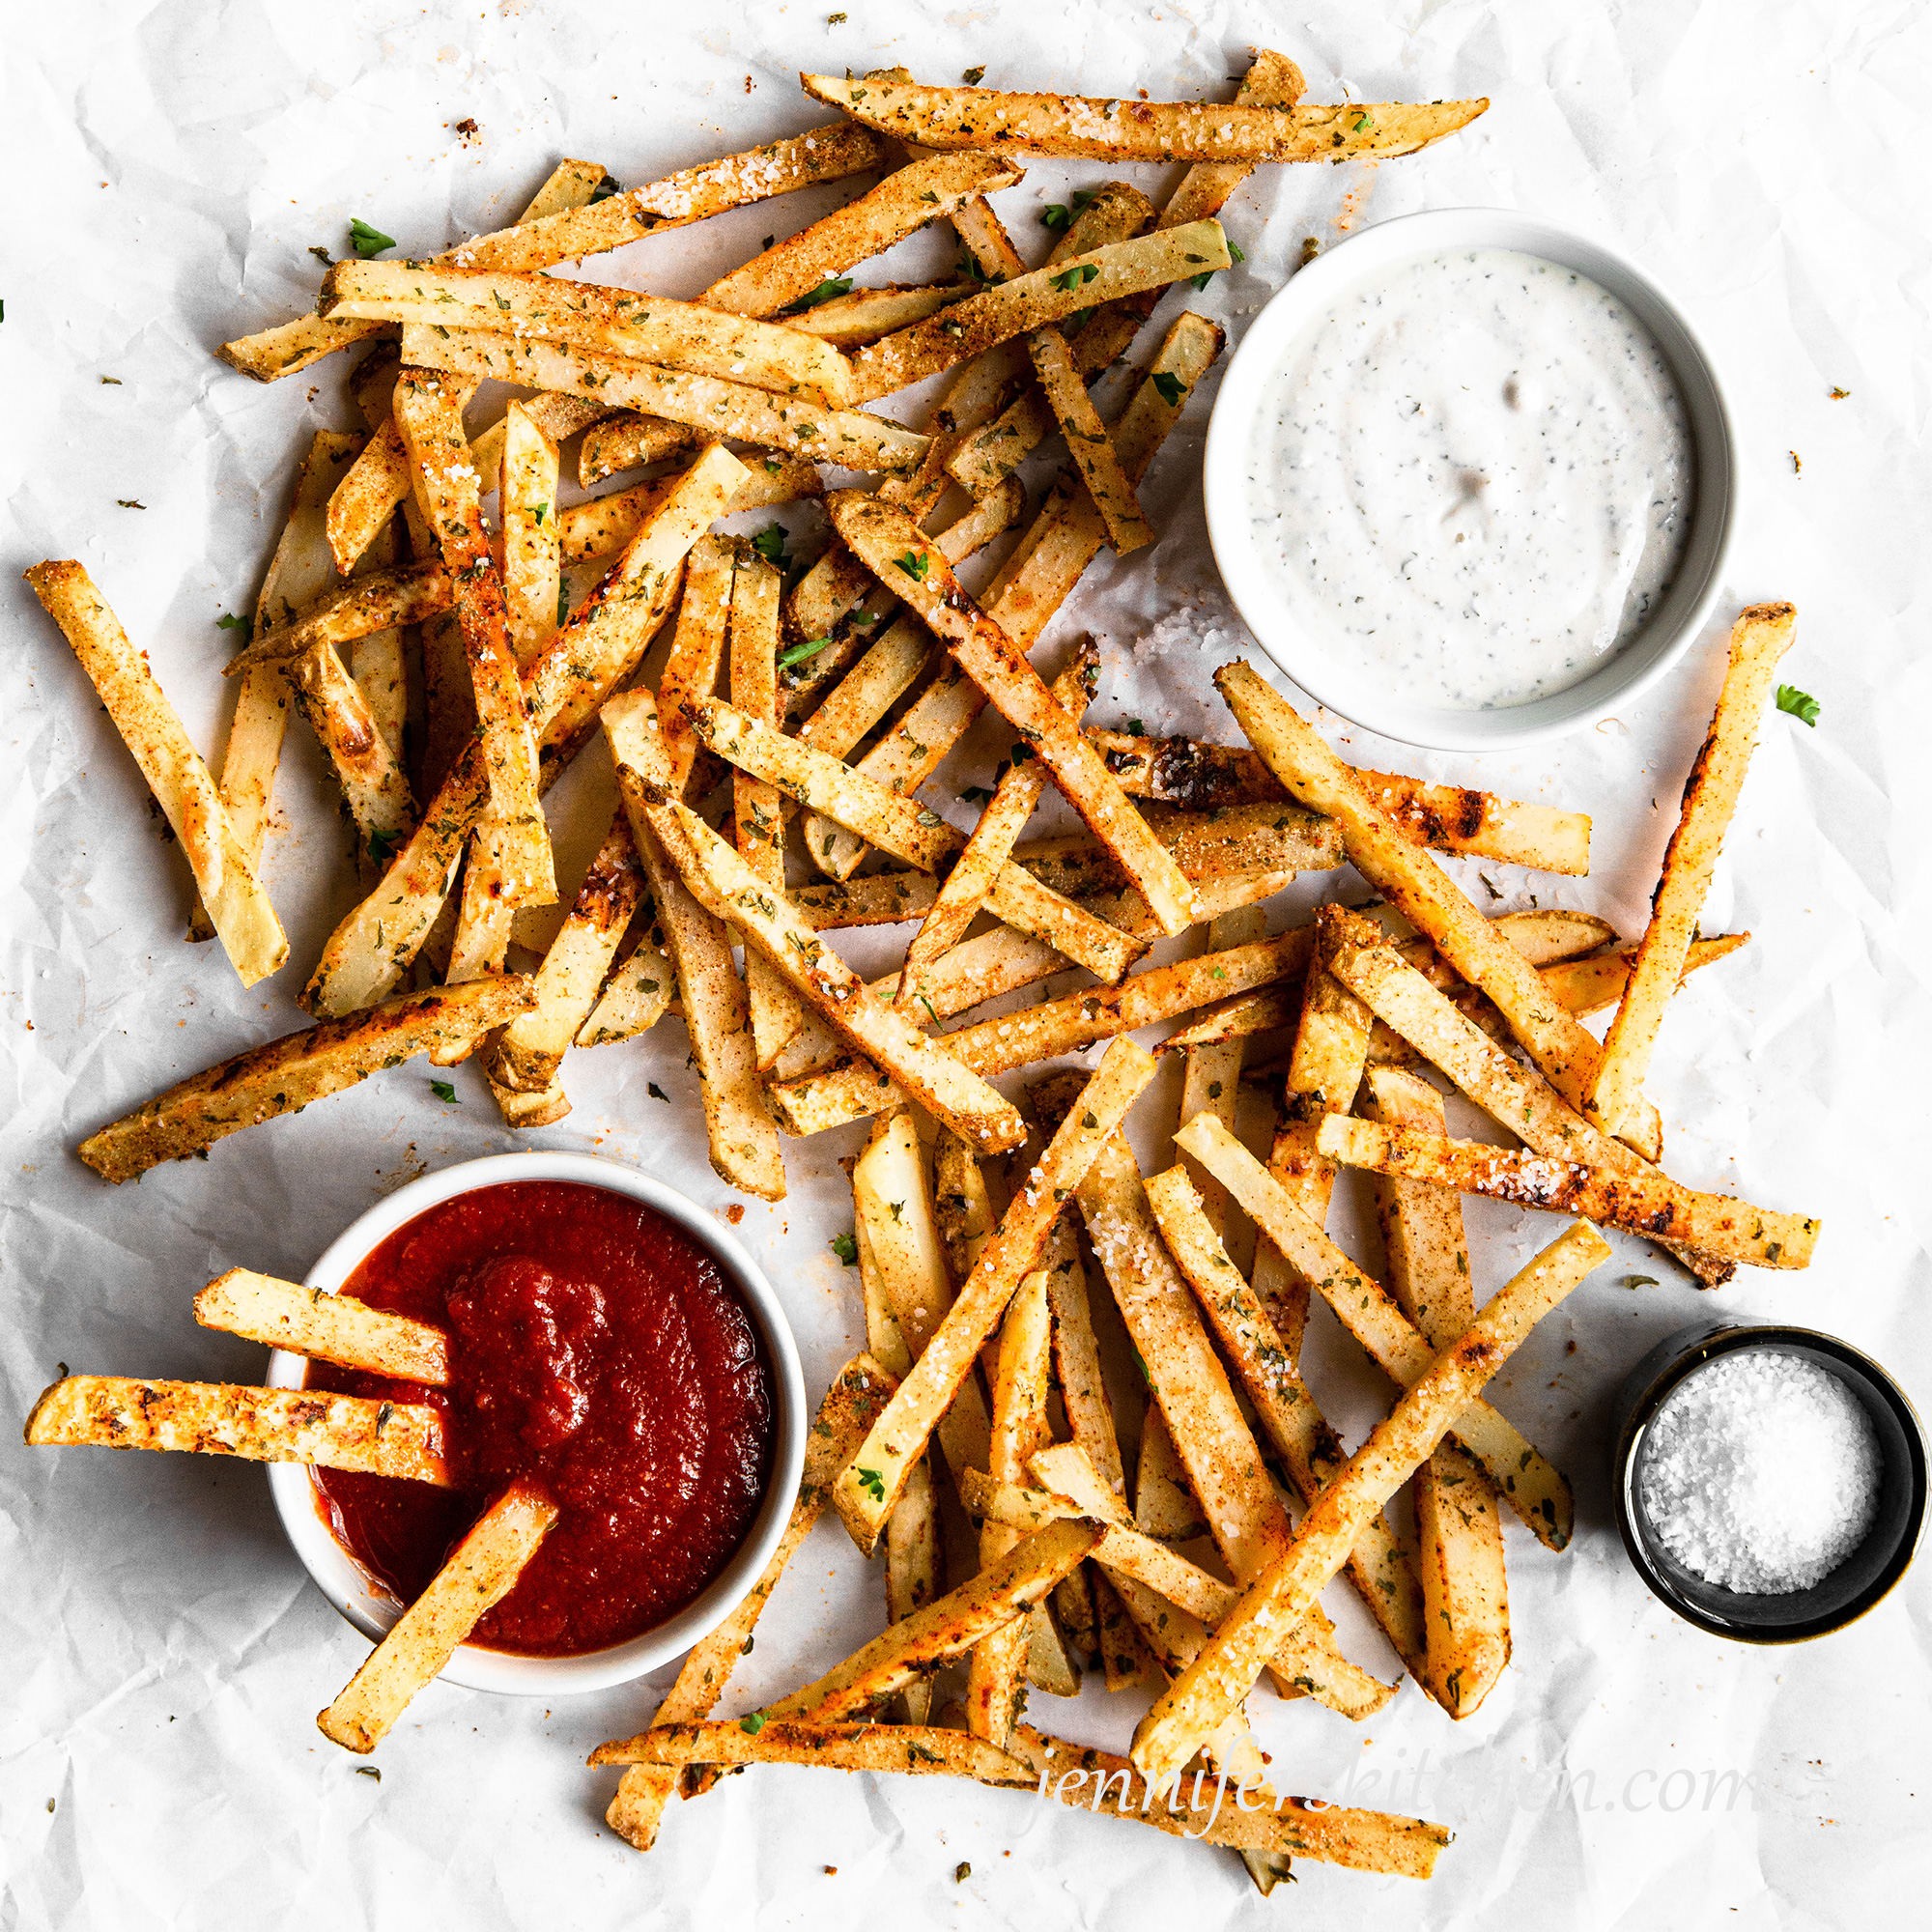 Healthy, No-Oil, Baked Fries